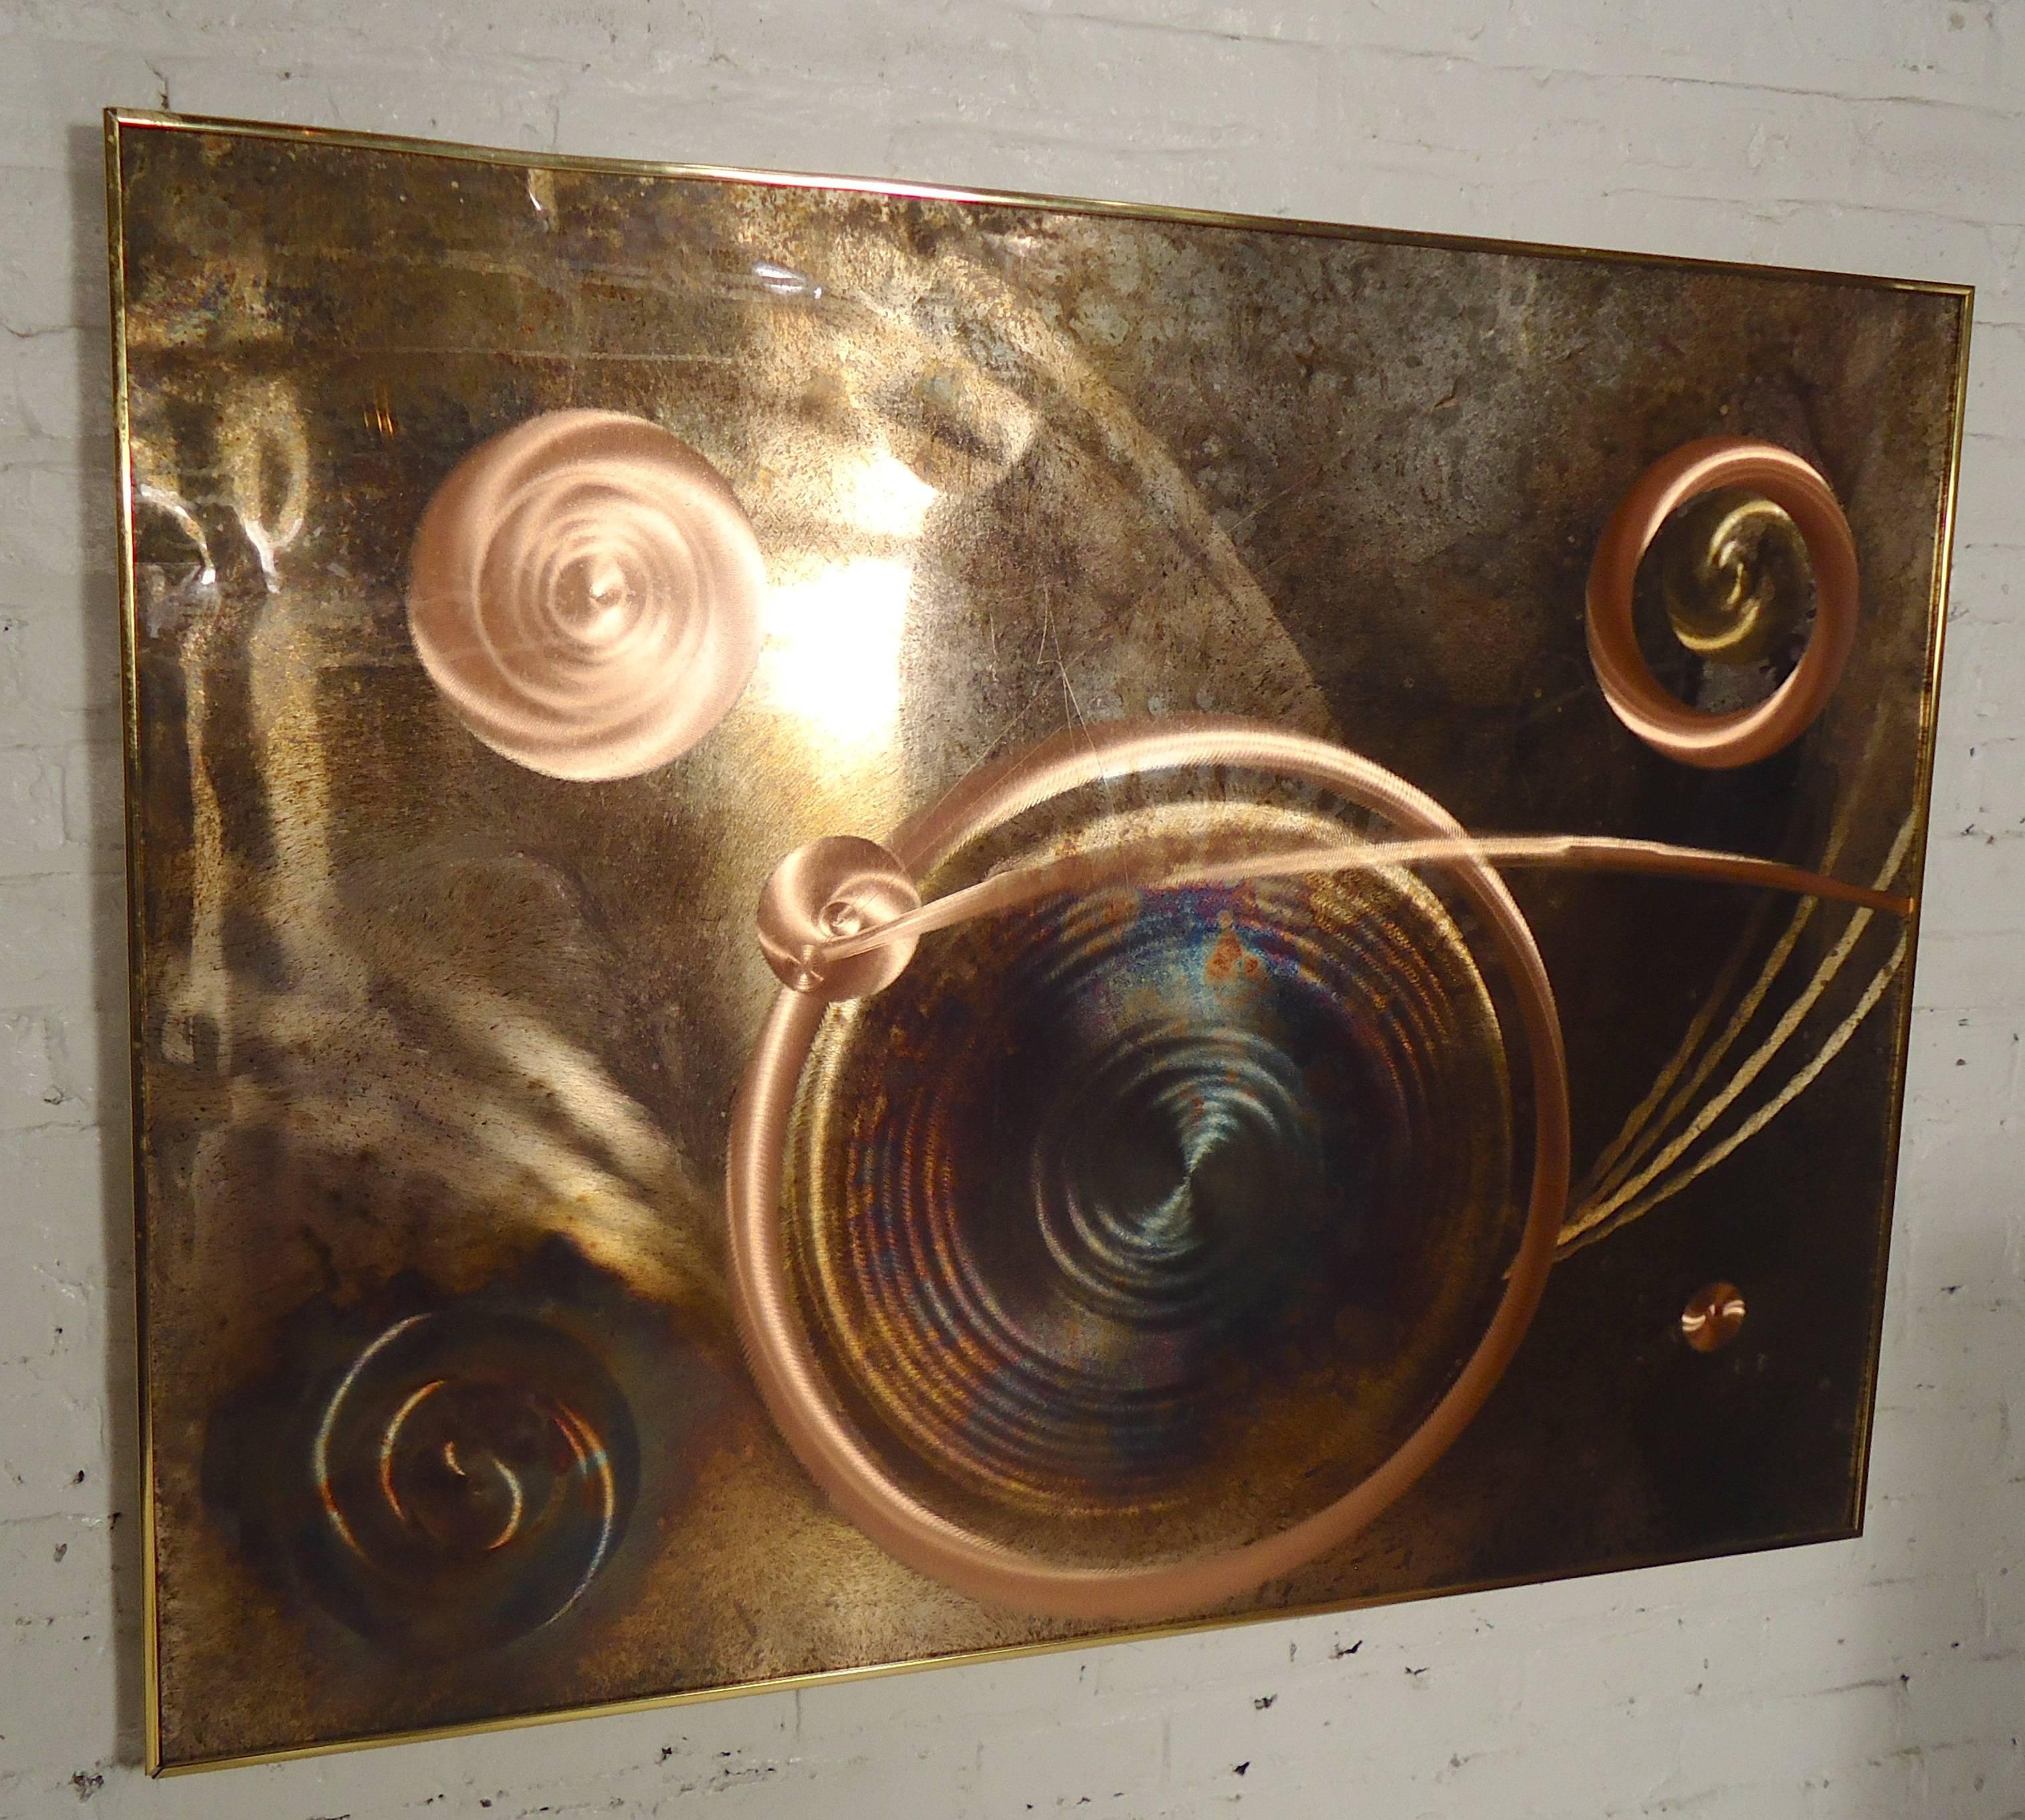 Beautiful framed wall art by Dale Clark signed. 
Beautiful designs are formed as a result of a chemical reaction between the plated surface and highly corrosive acids. Additional textures are introduced by carving, grinding and etching. 

(Please